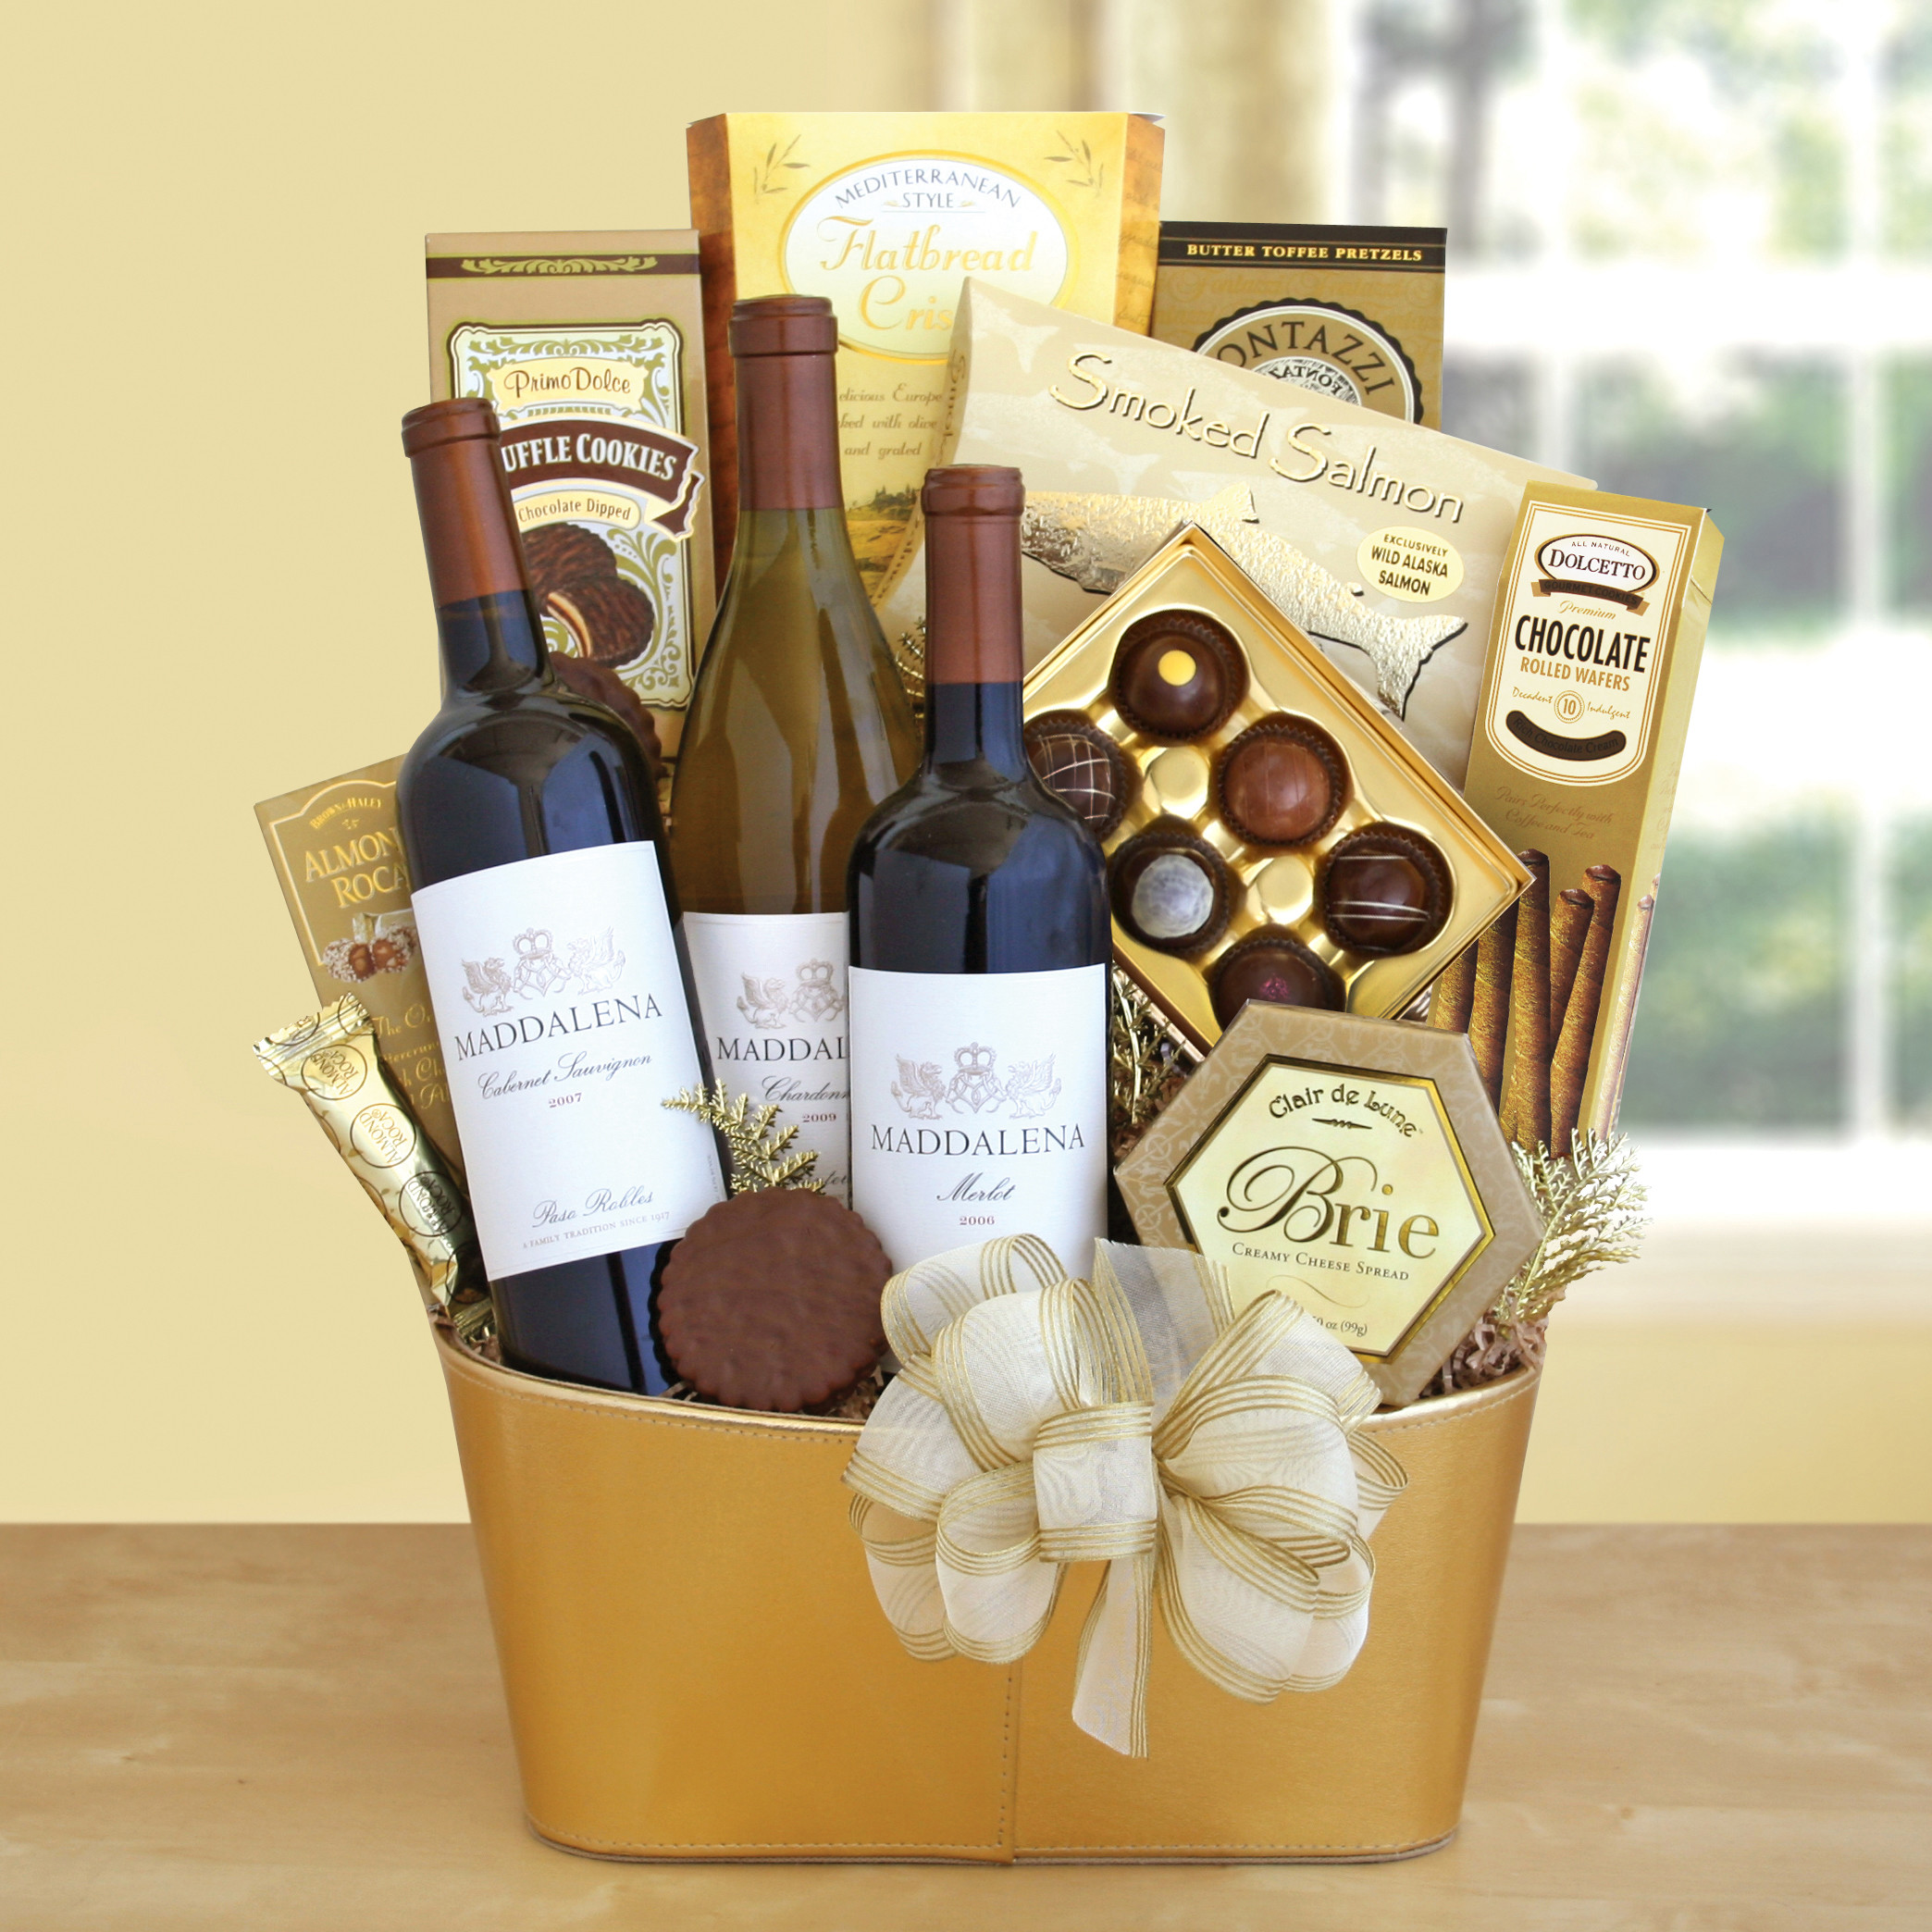 How To Make A Wine Gift Basket Ideas Unique Golden Vineyard Gourmet Gift Basket Wine Lovers Of How To Make A Wine Gift Basket Ideas 